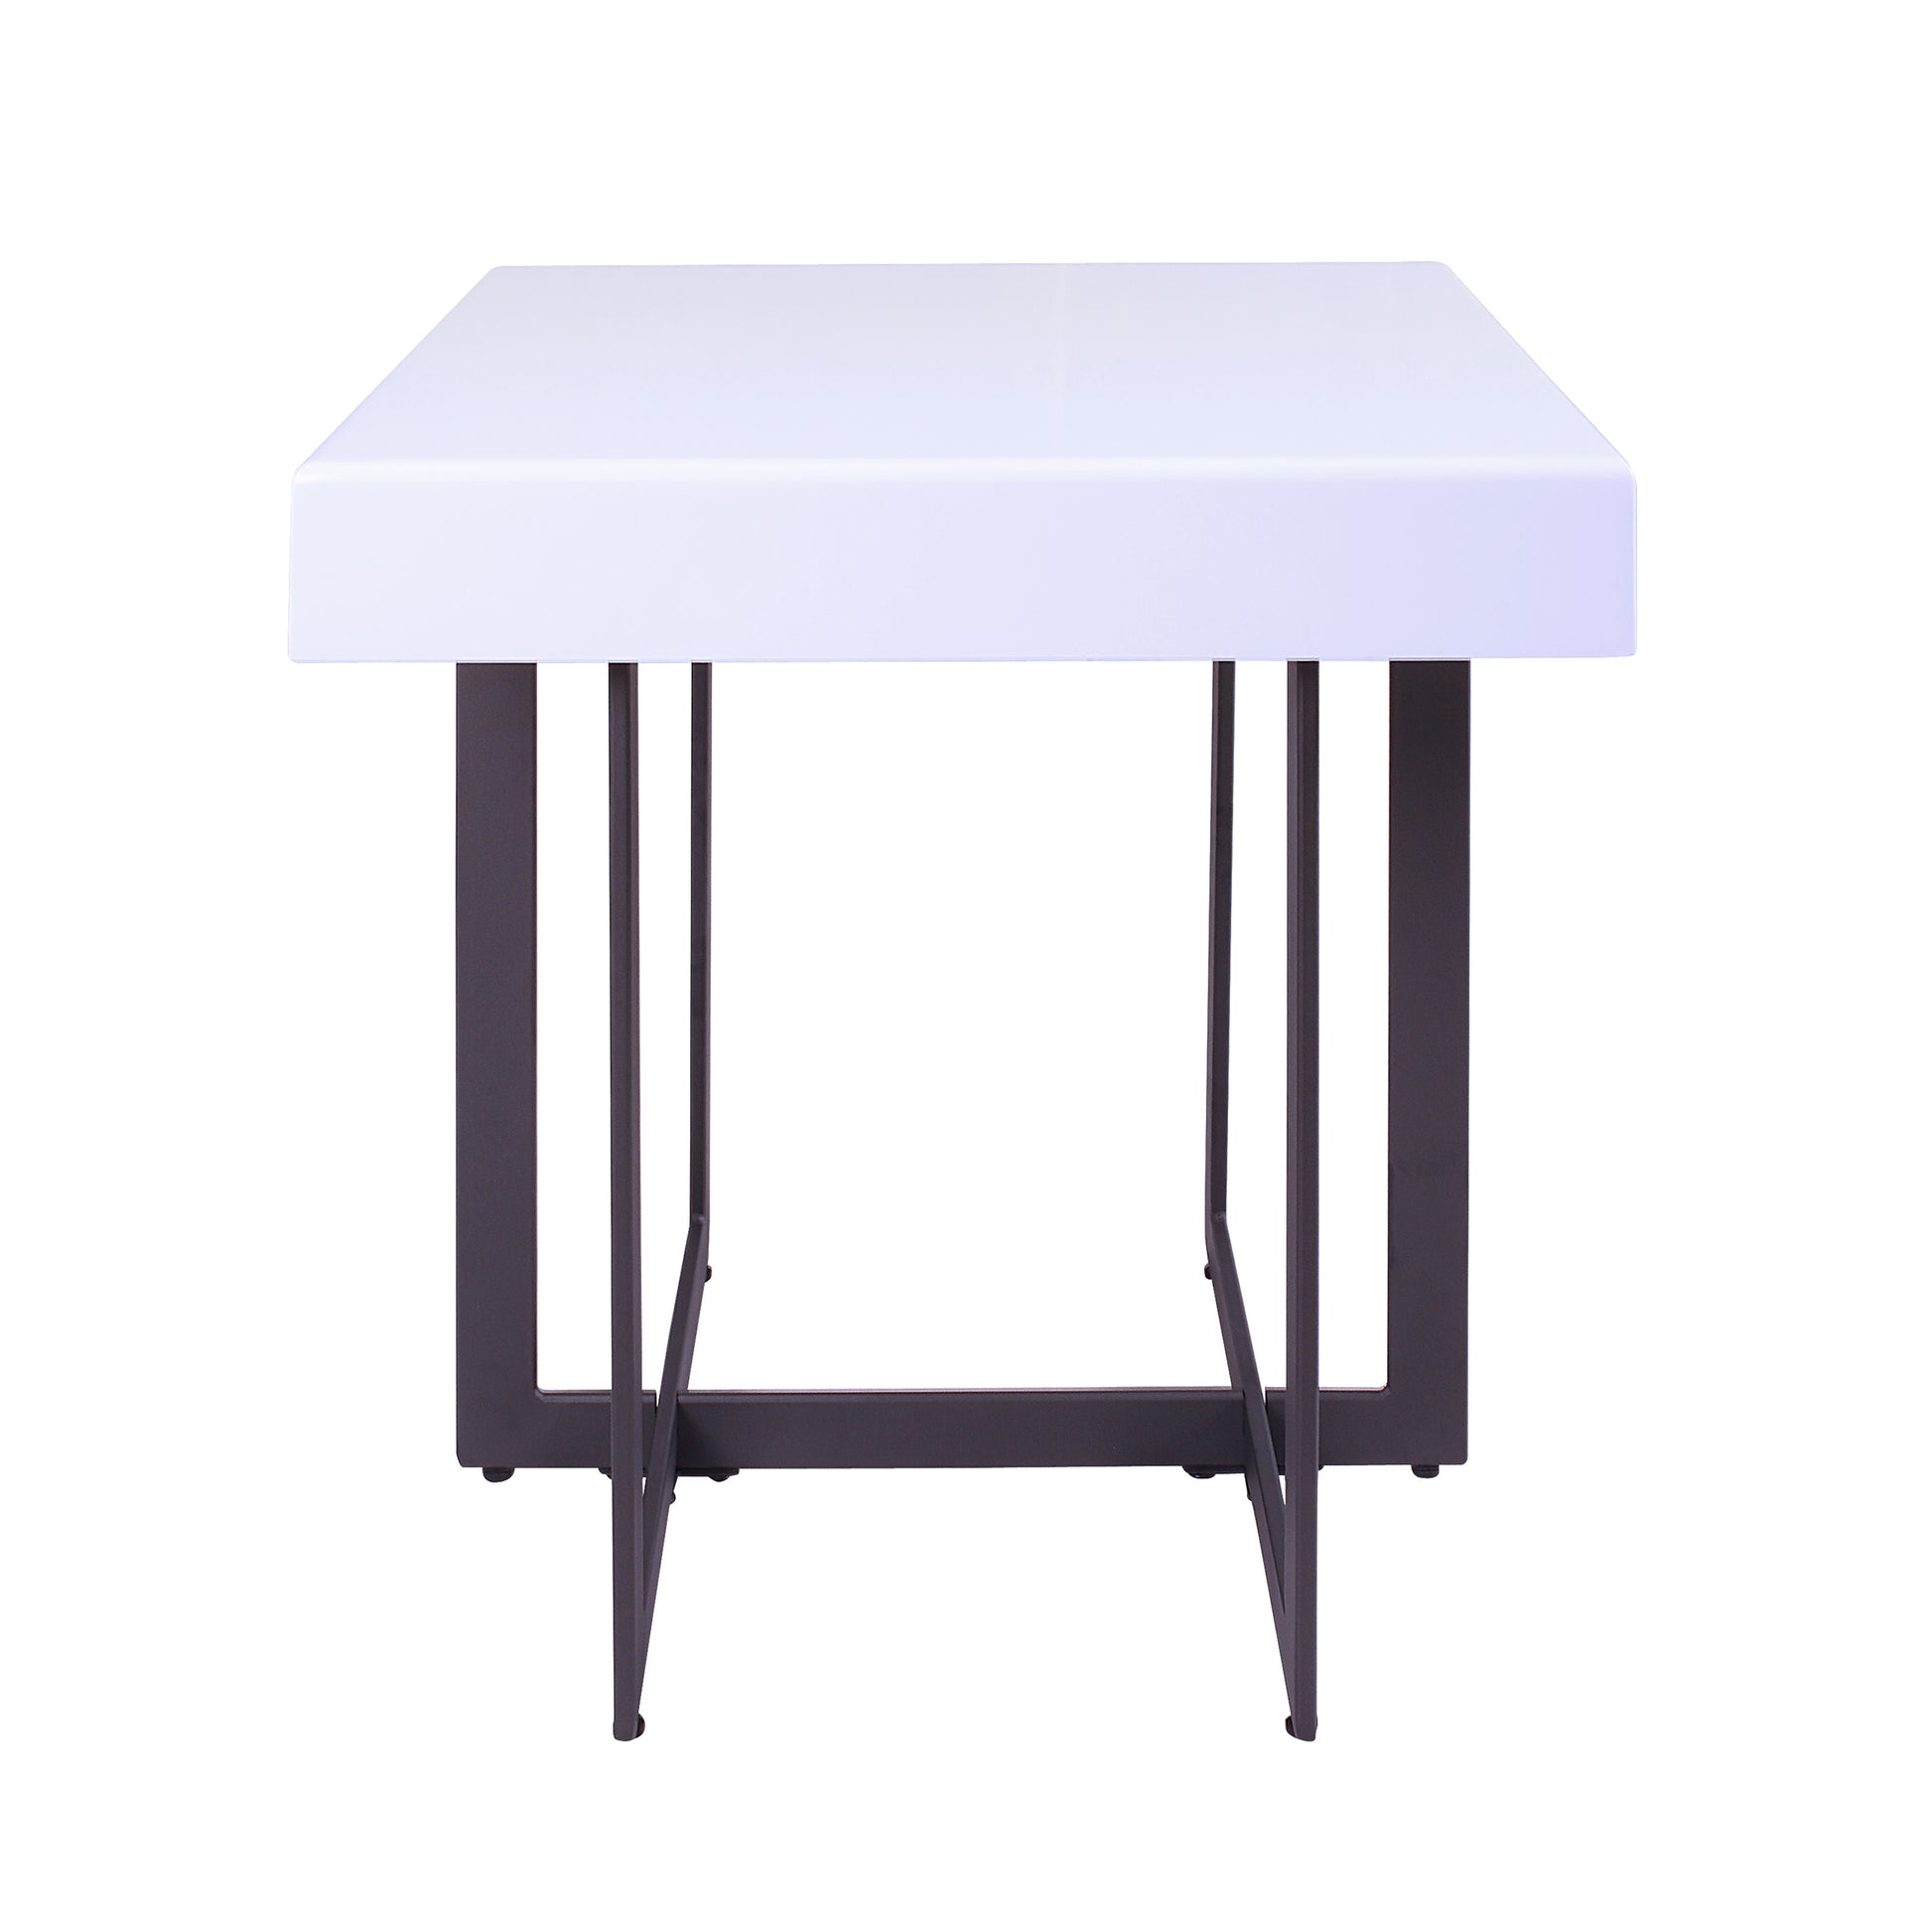 Front-facing end table only back view from a three-piece modern white high gloss and gunmetal storage coffee table set with hidden drawer open on a white background